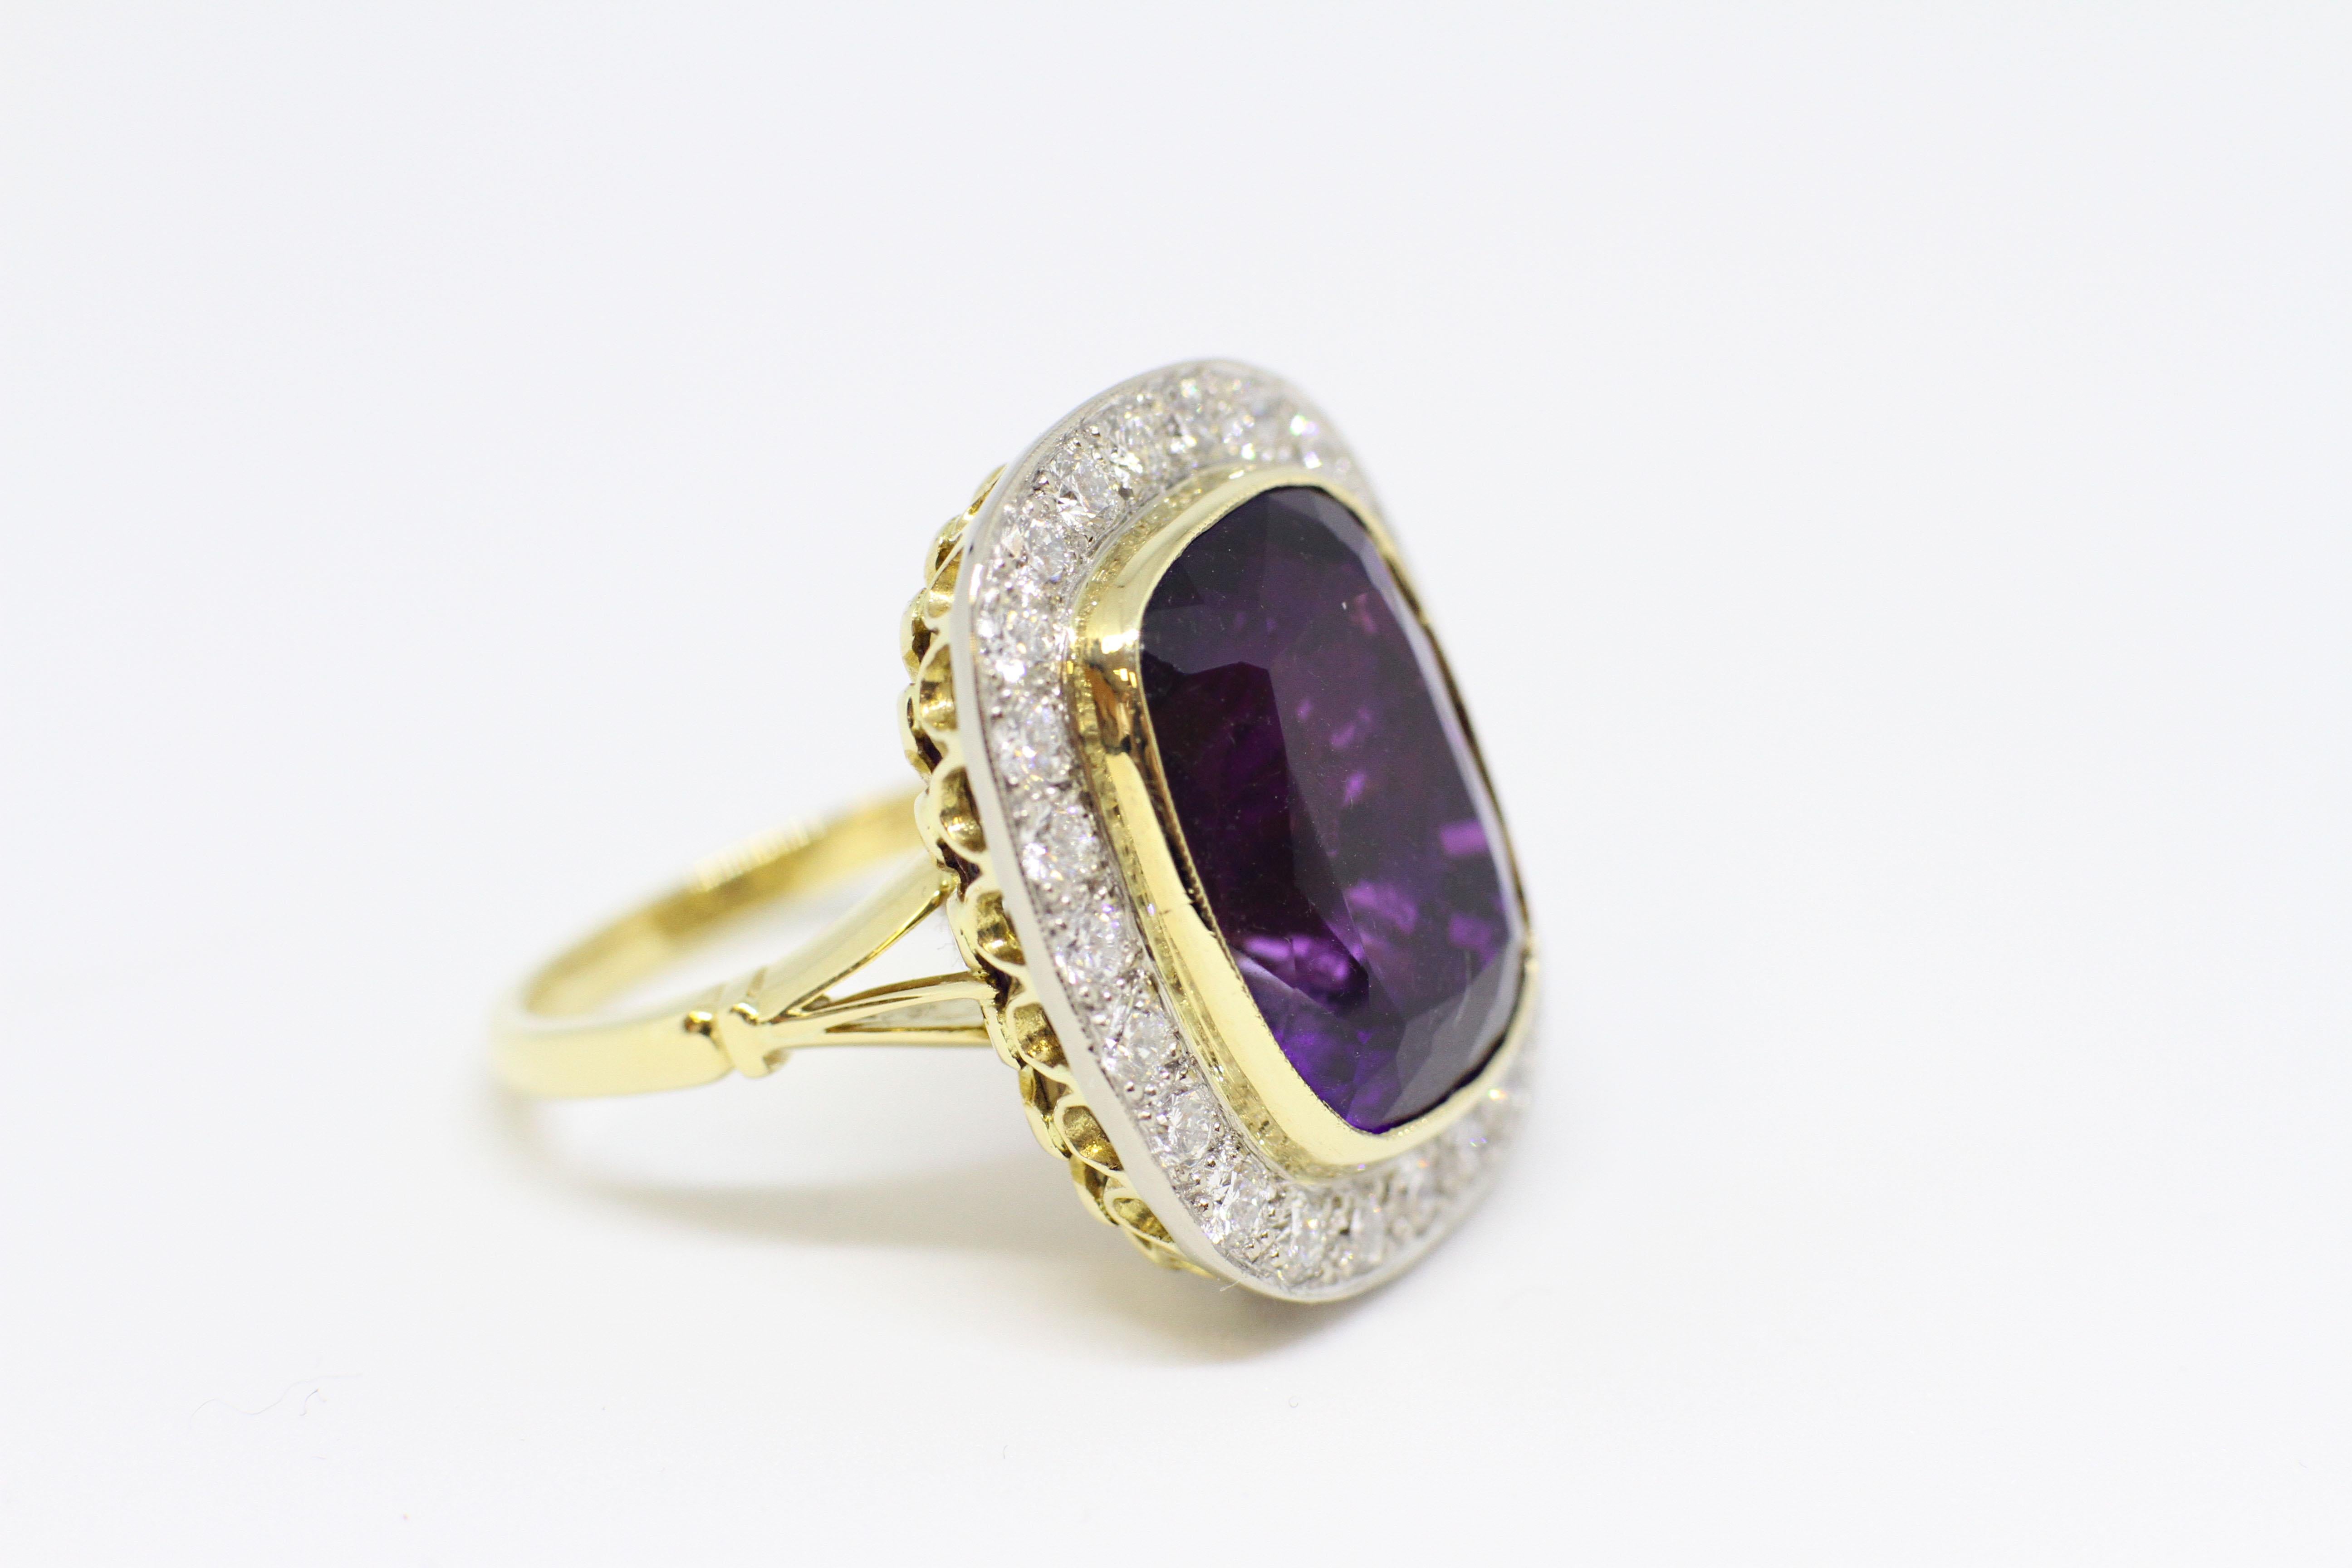 Amethyst and diamond cocktail cluster ring set with a cushion shape amethyst in an open back rub-over setting with an approximate weight of 13.00 carats, surrounded by twenty four round brilliant cut diamonds of fine quality in grain settings with a